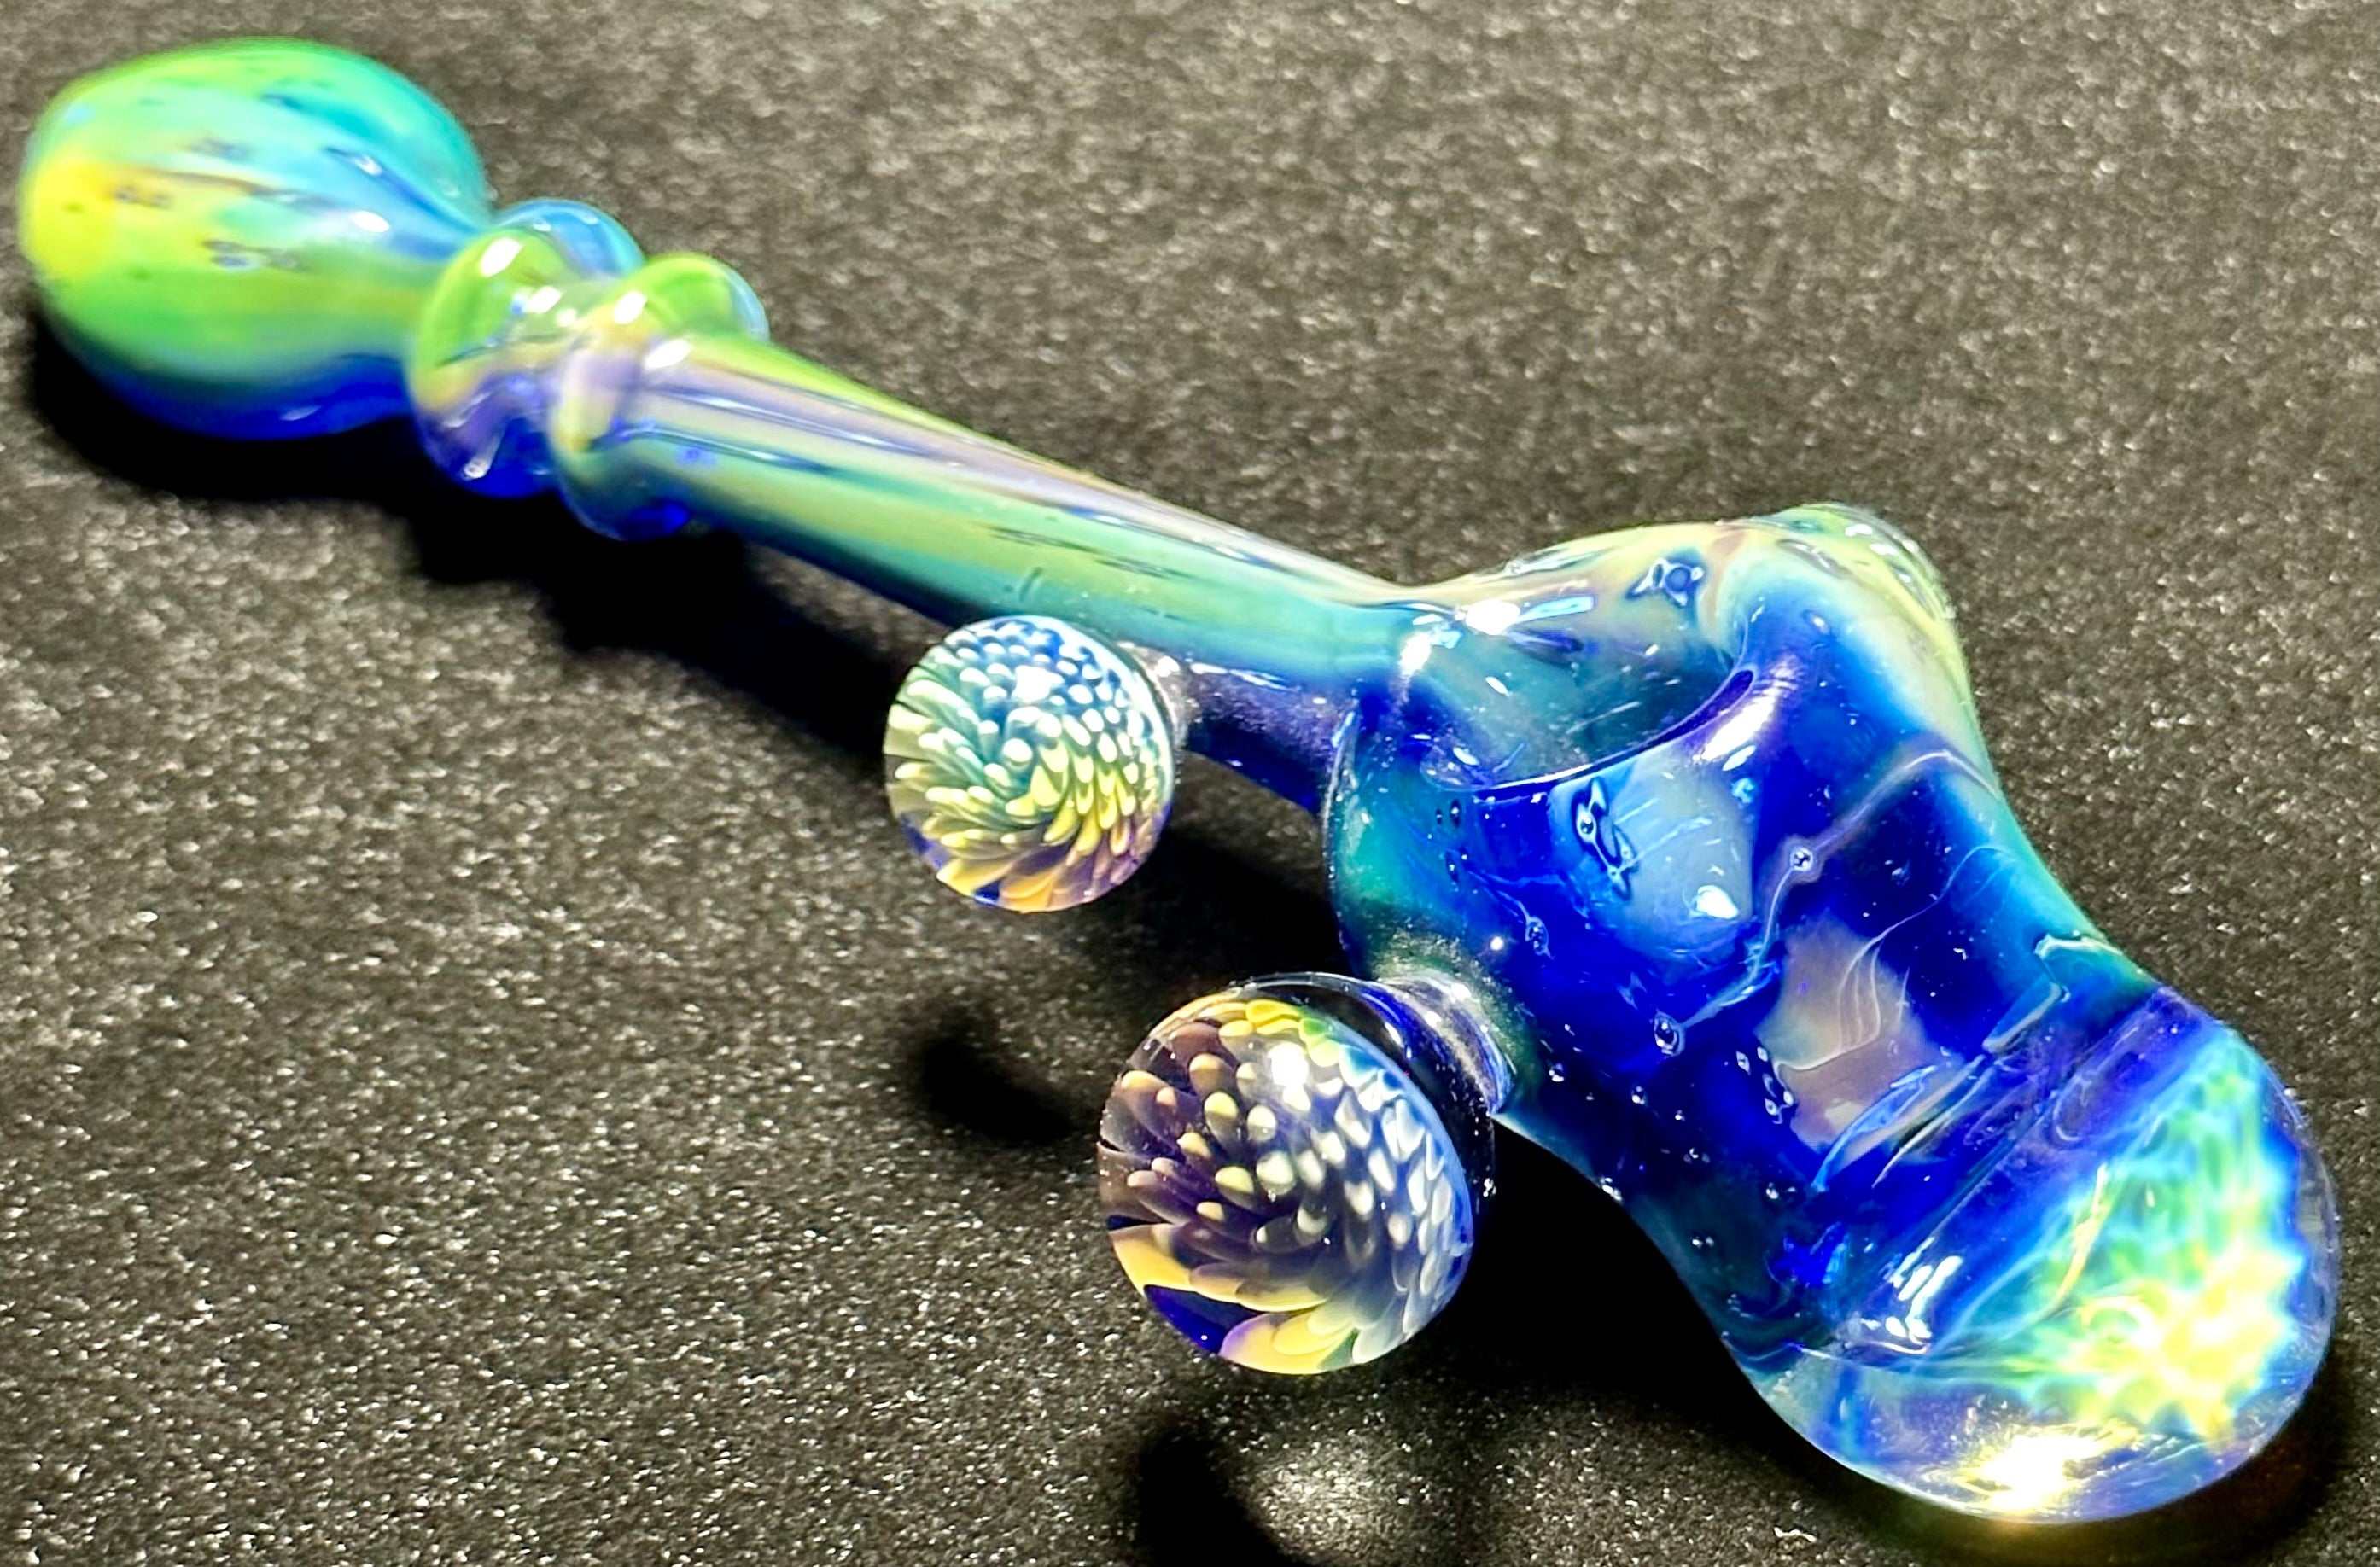 Fearn Gully Bubbletrap Fumed Honeycomb Hammer Double Implosion Mibs